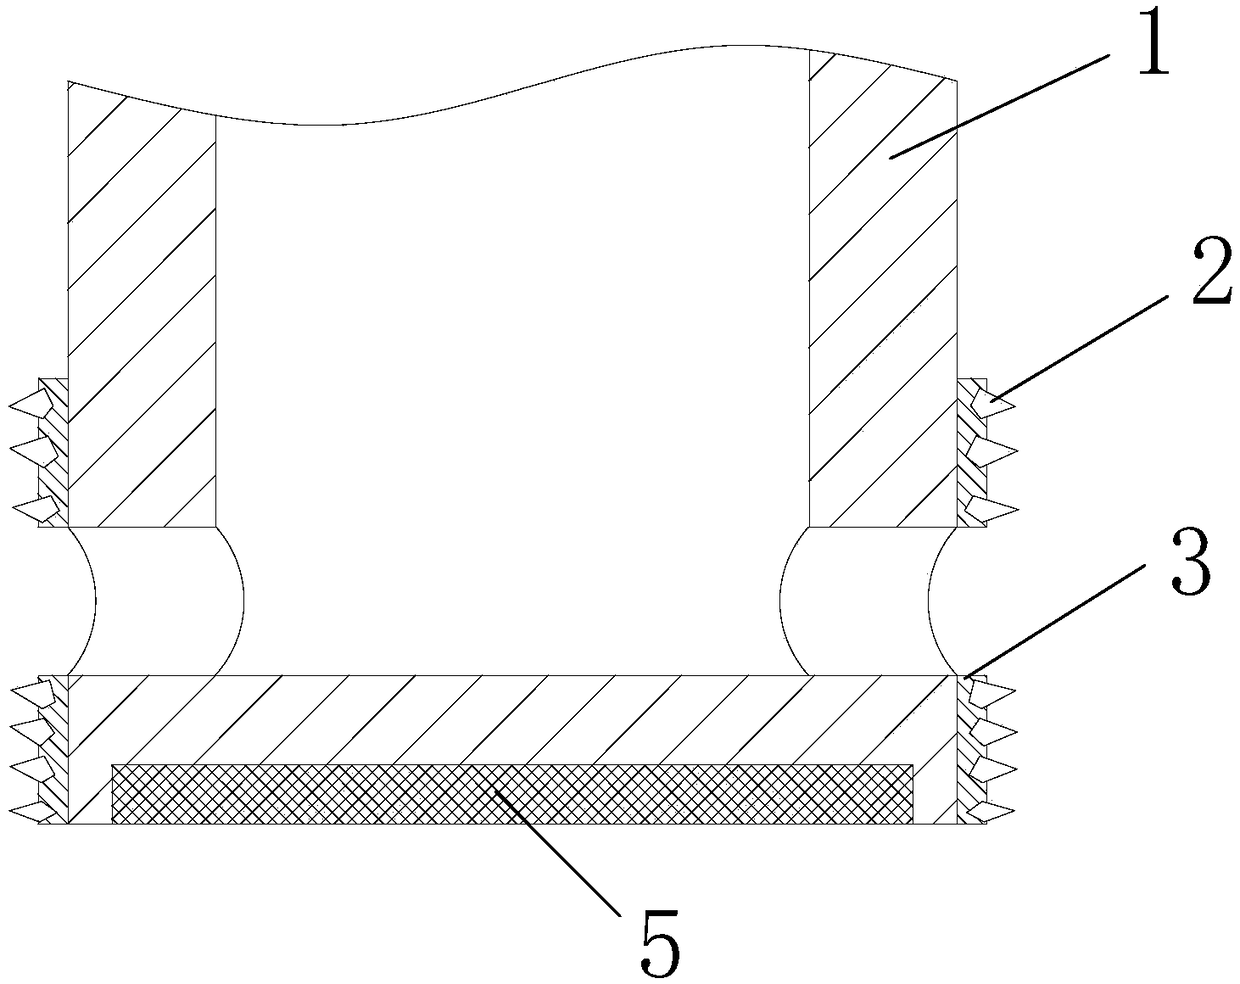 Tool cathode and method for improving electrolysis milling machining bottom face flatness